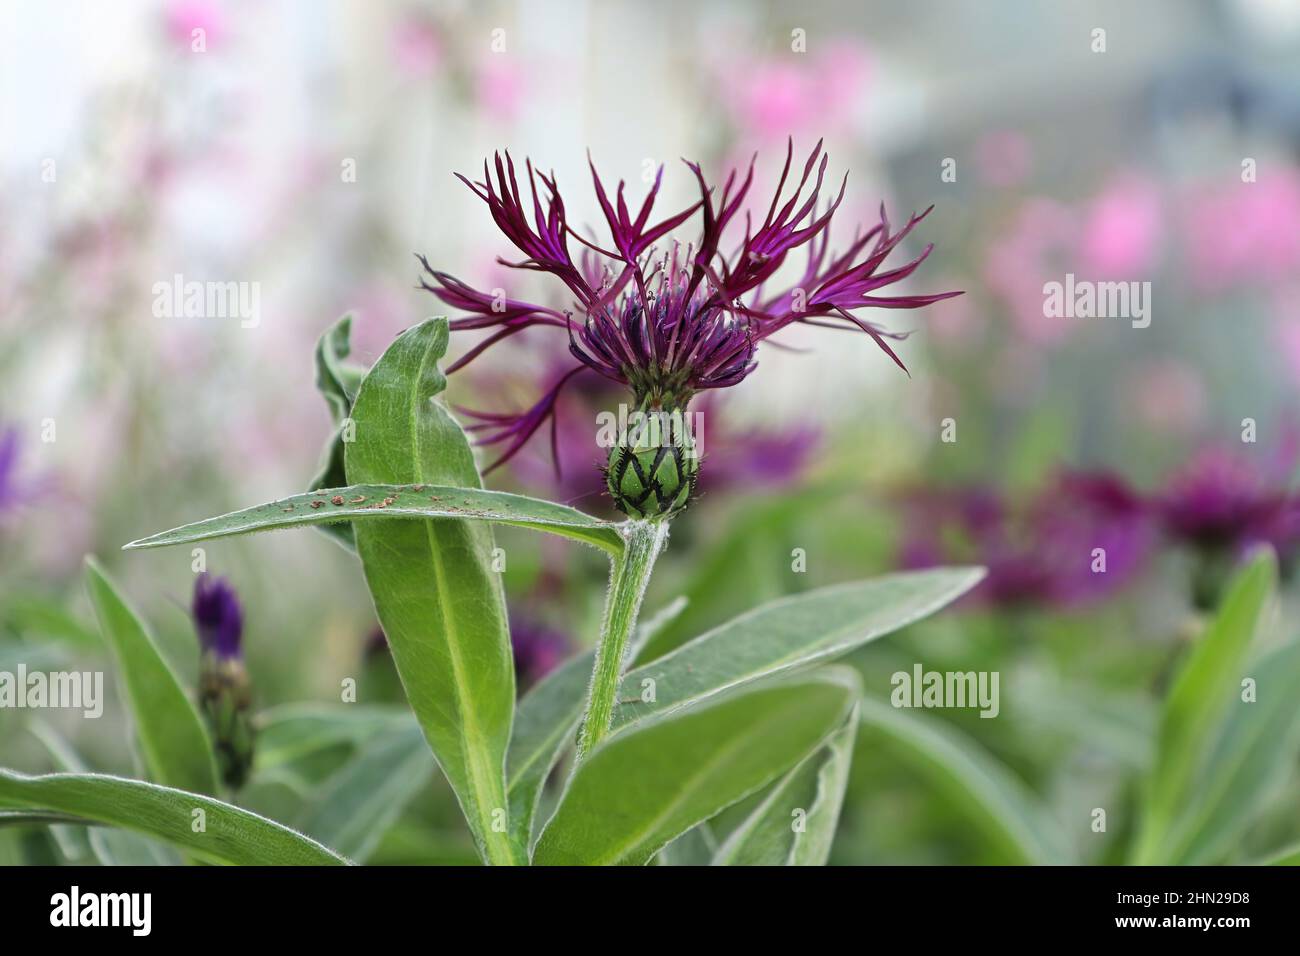 Closeup side view of a purple knapweed flower. Stock Photo